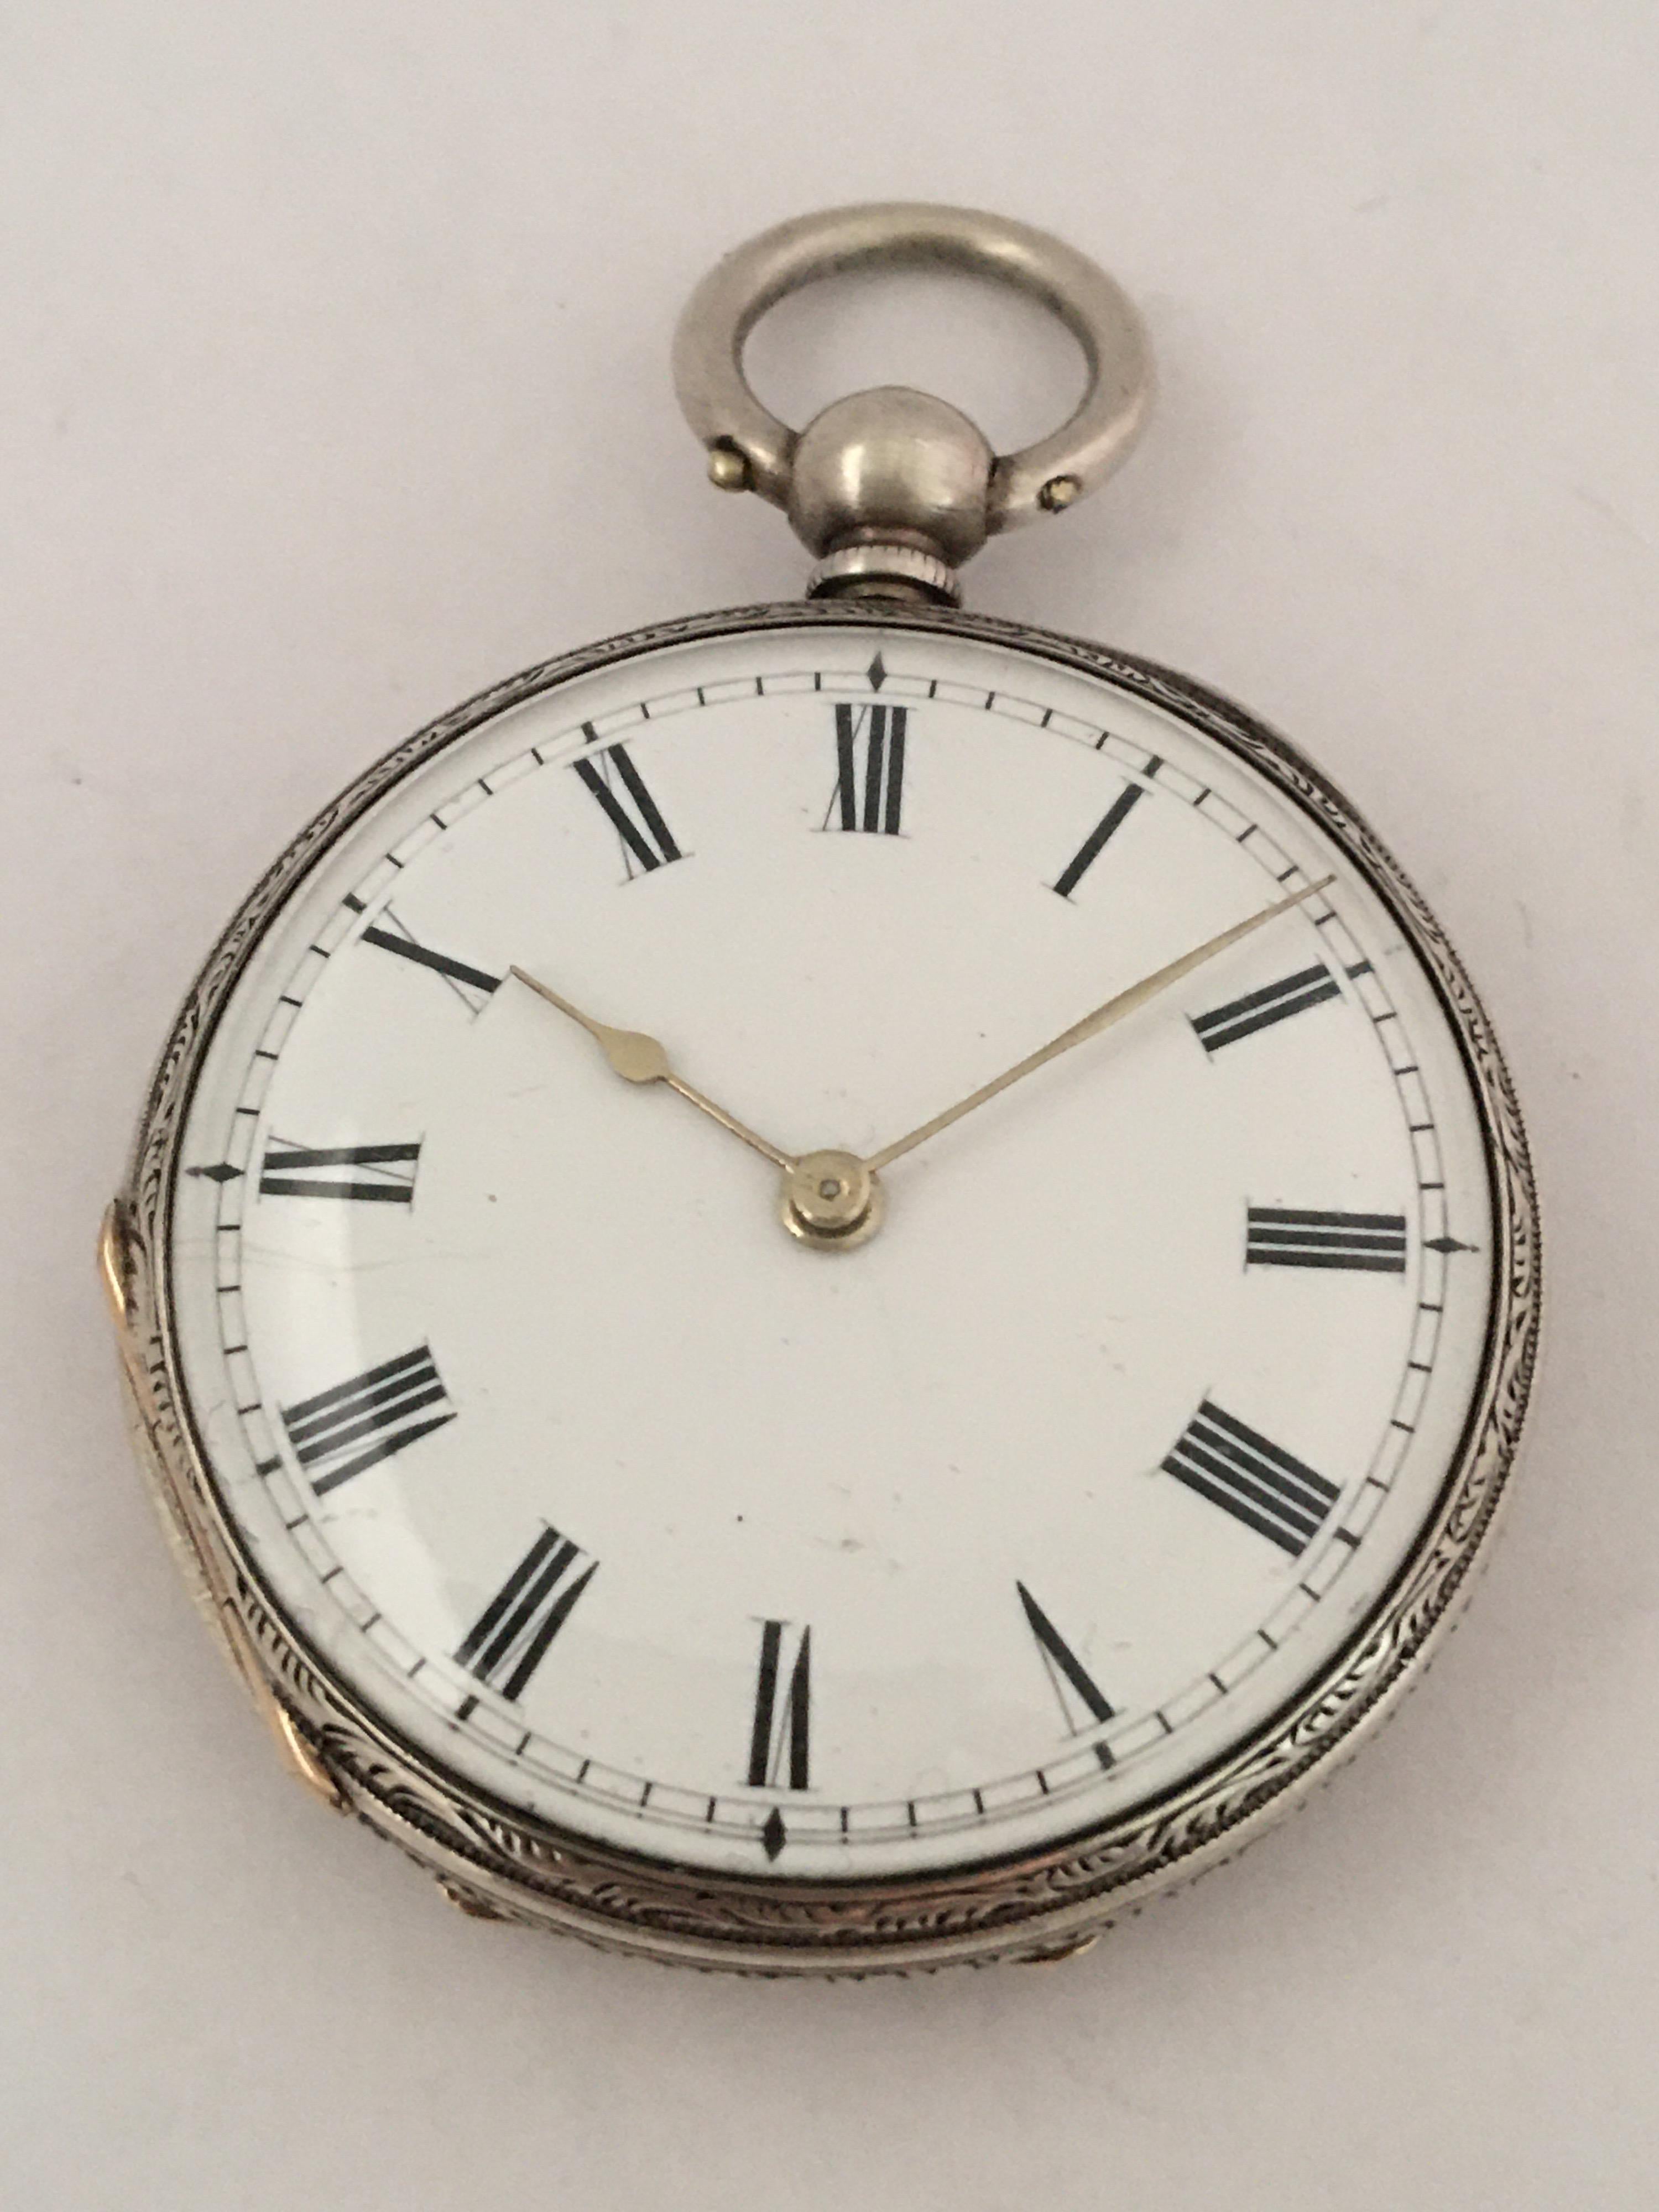 This beautiful antique silver pocket watch is in good working condition. It has been serviced and it is running well. It comes with antique winding key.

Please study the images carefully carefully as form part of the description.